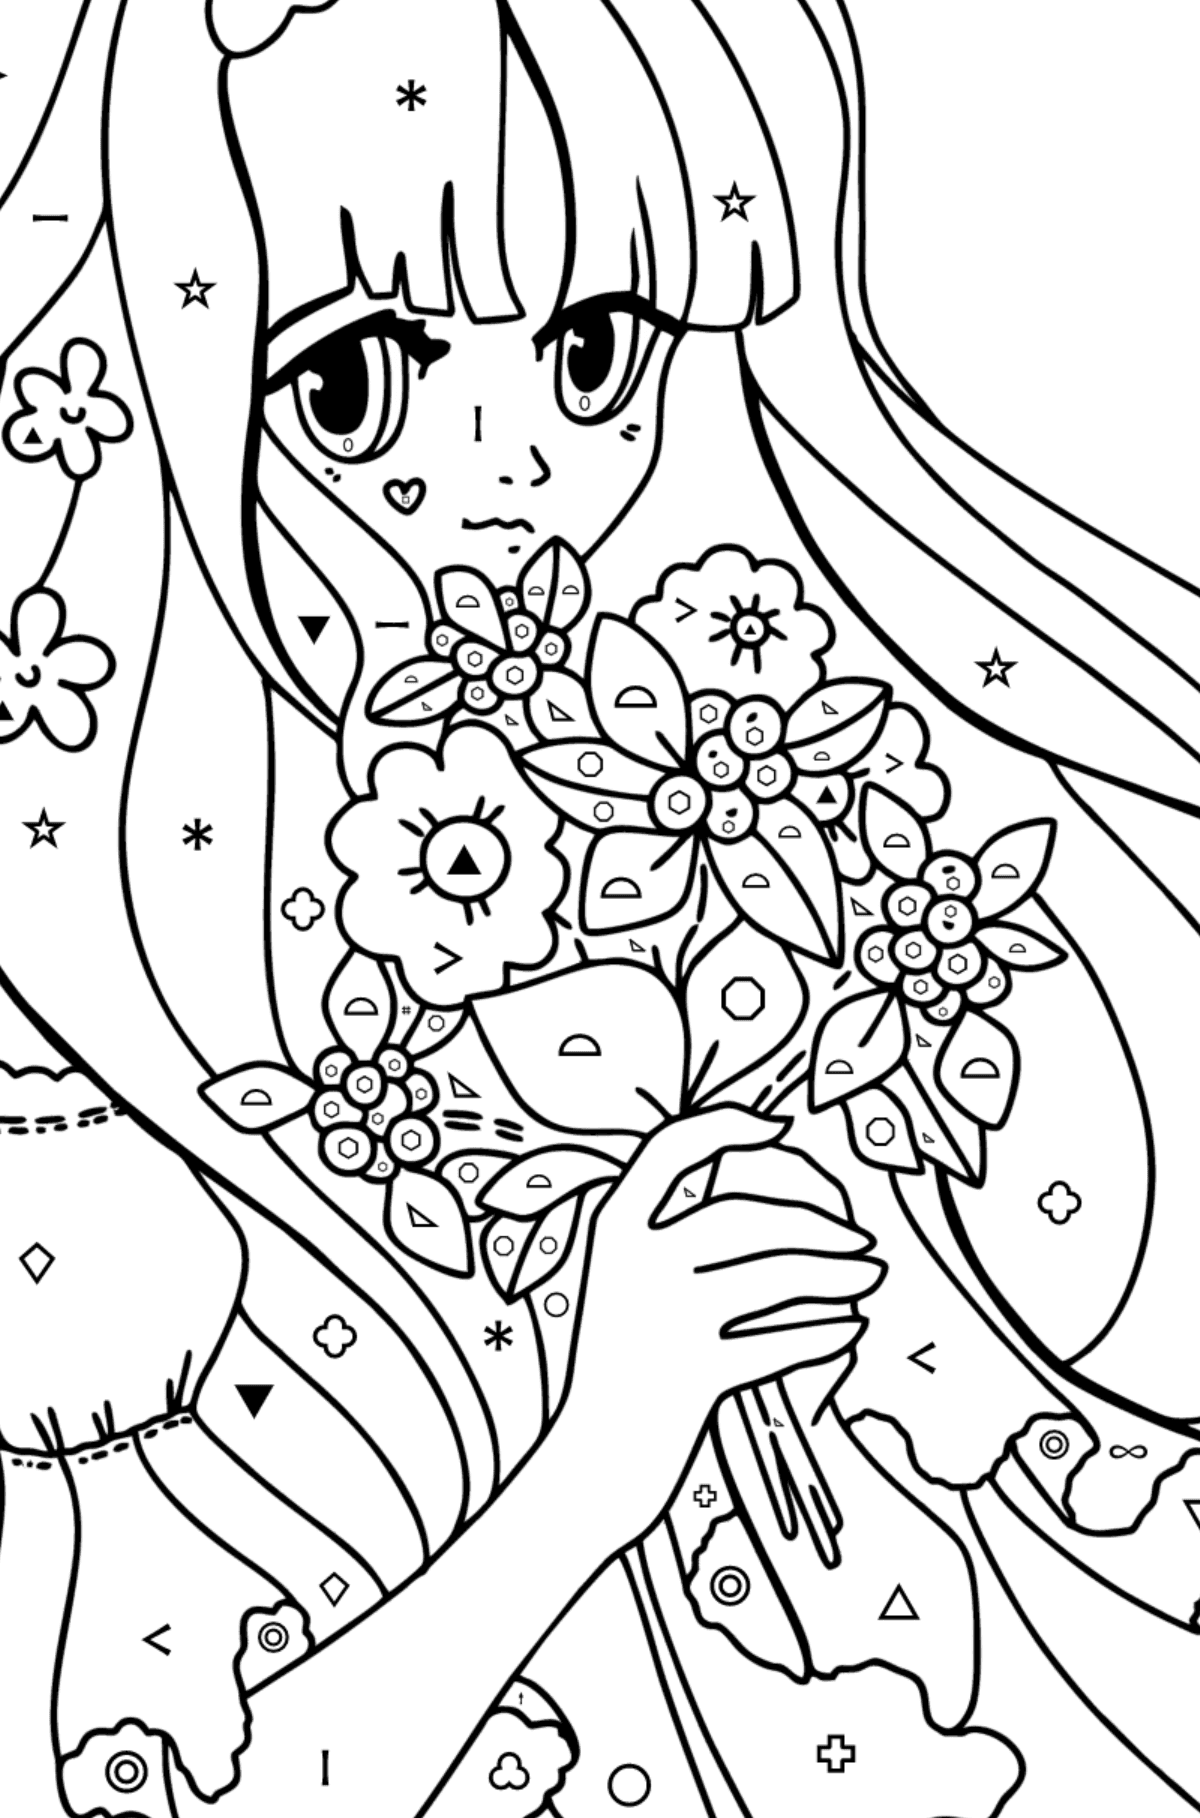 Japanese girl with long hair coloring page - Coloring by Symbols and Geometric Shapes for Kids